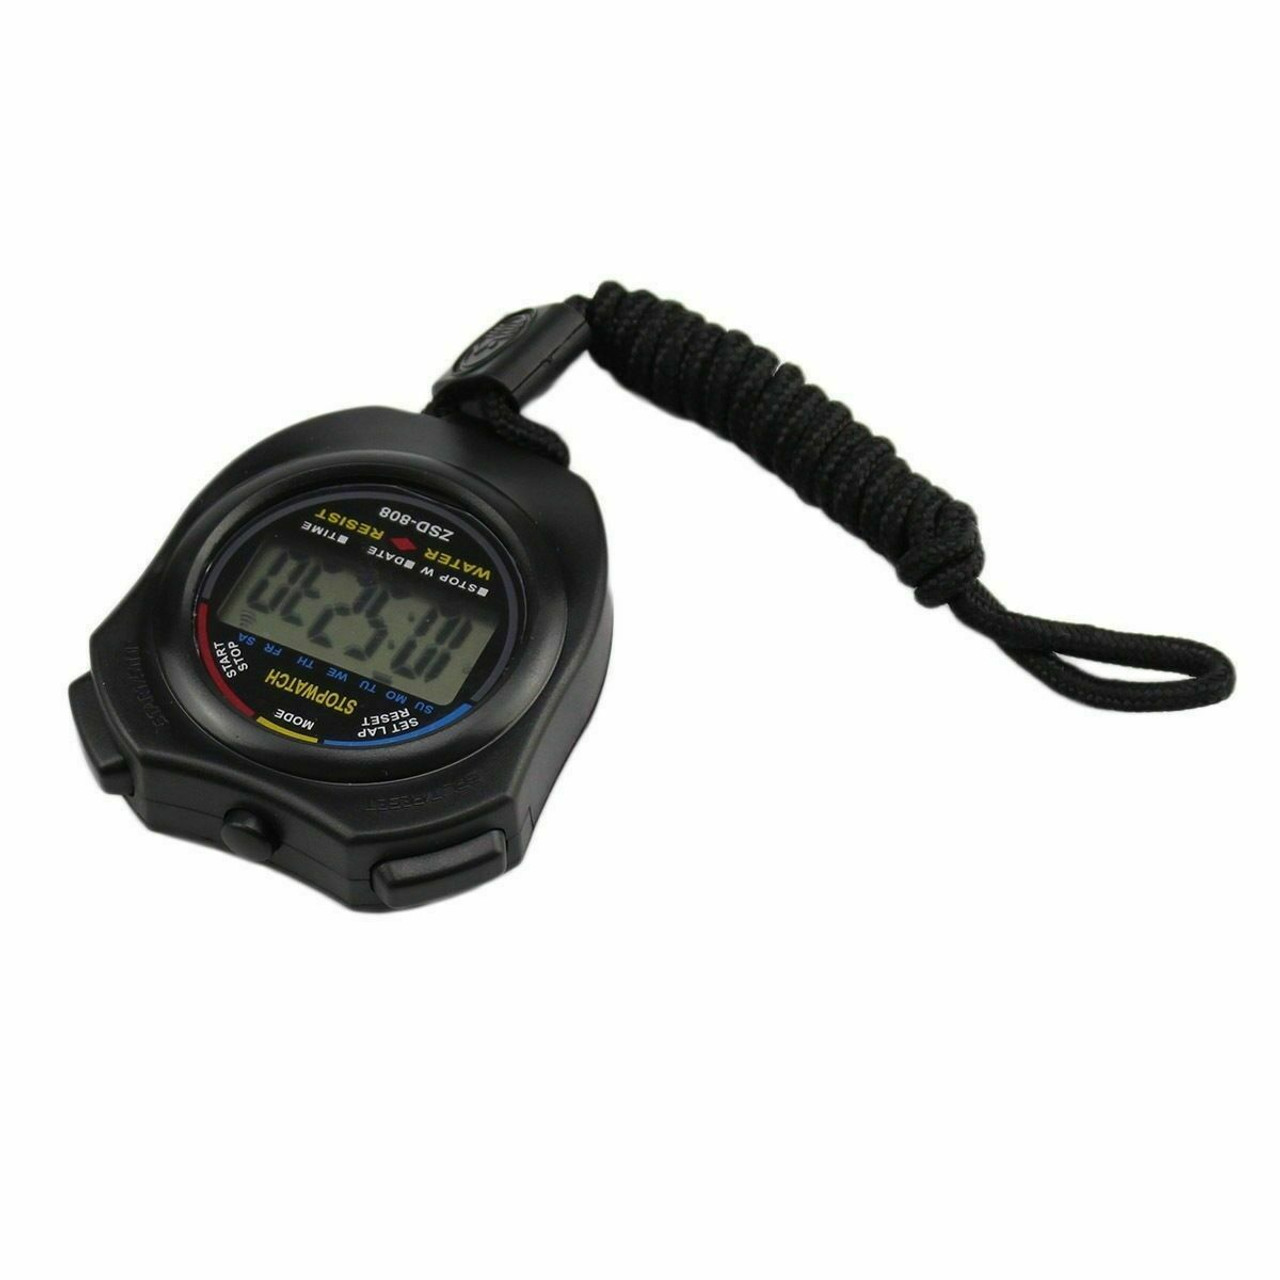 Waterproof Digital LCD Stopwatch Sports Counter Chronograph Timer Odometer Watch